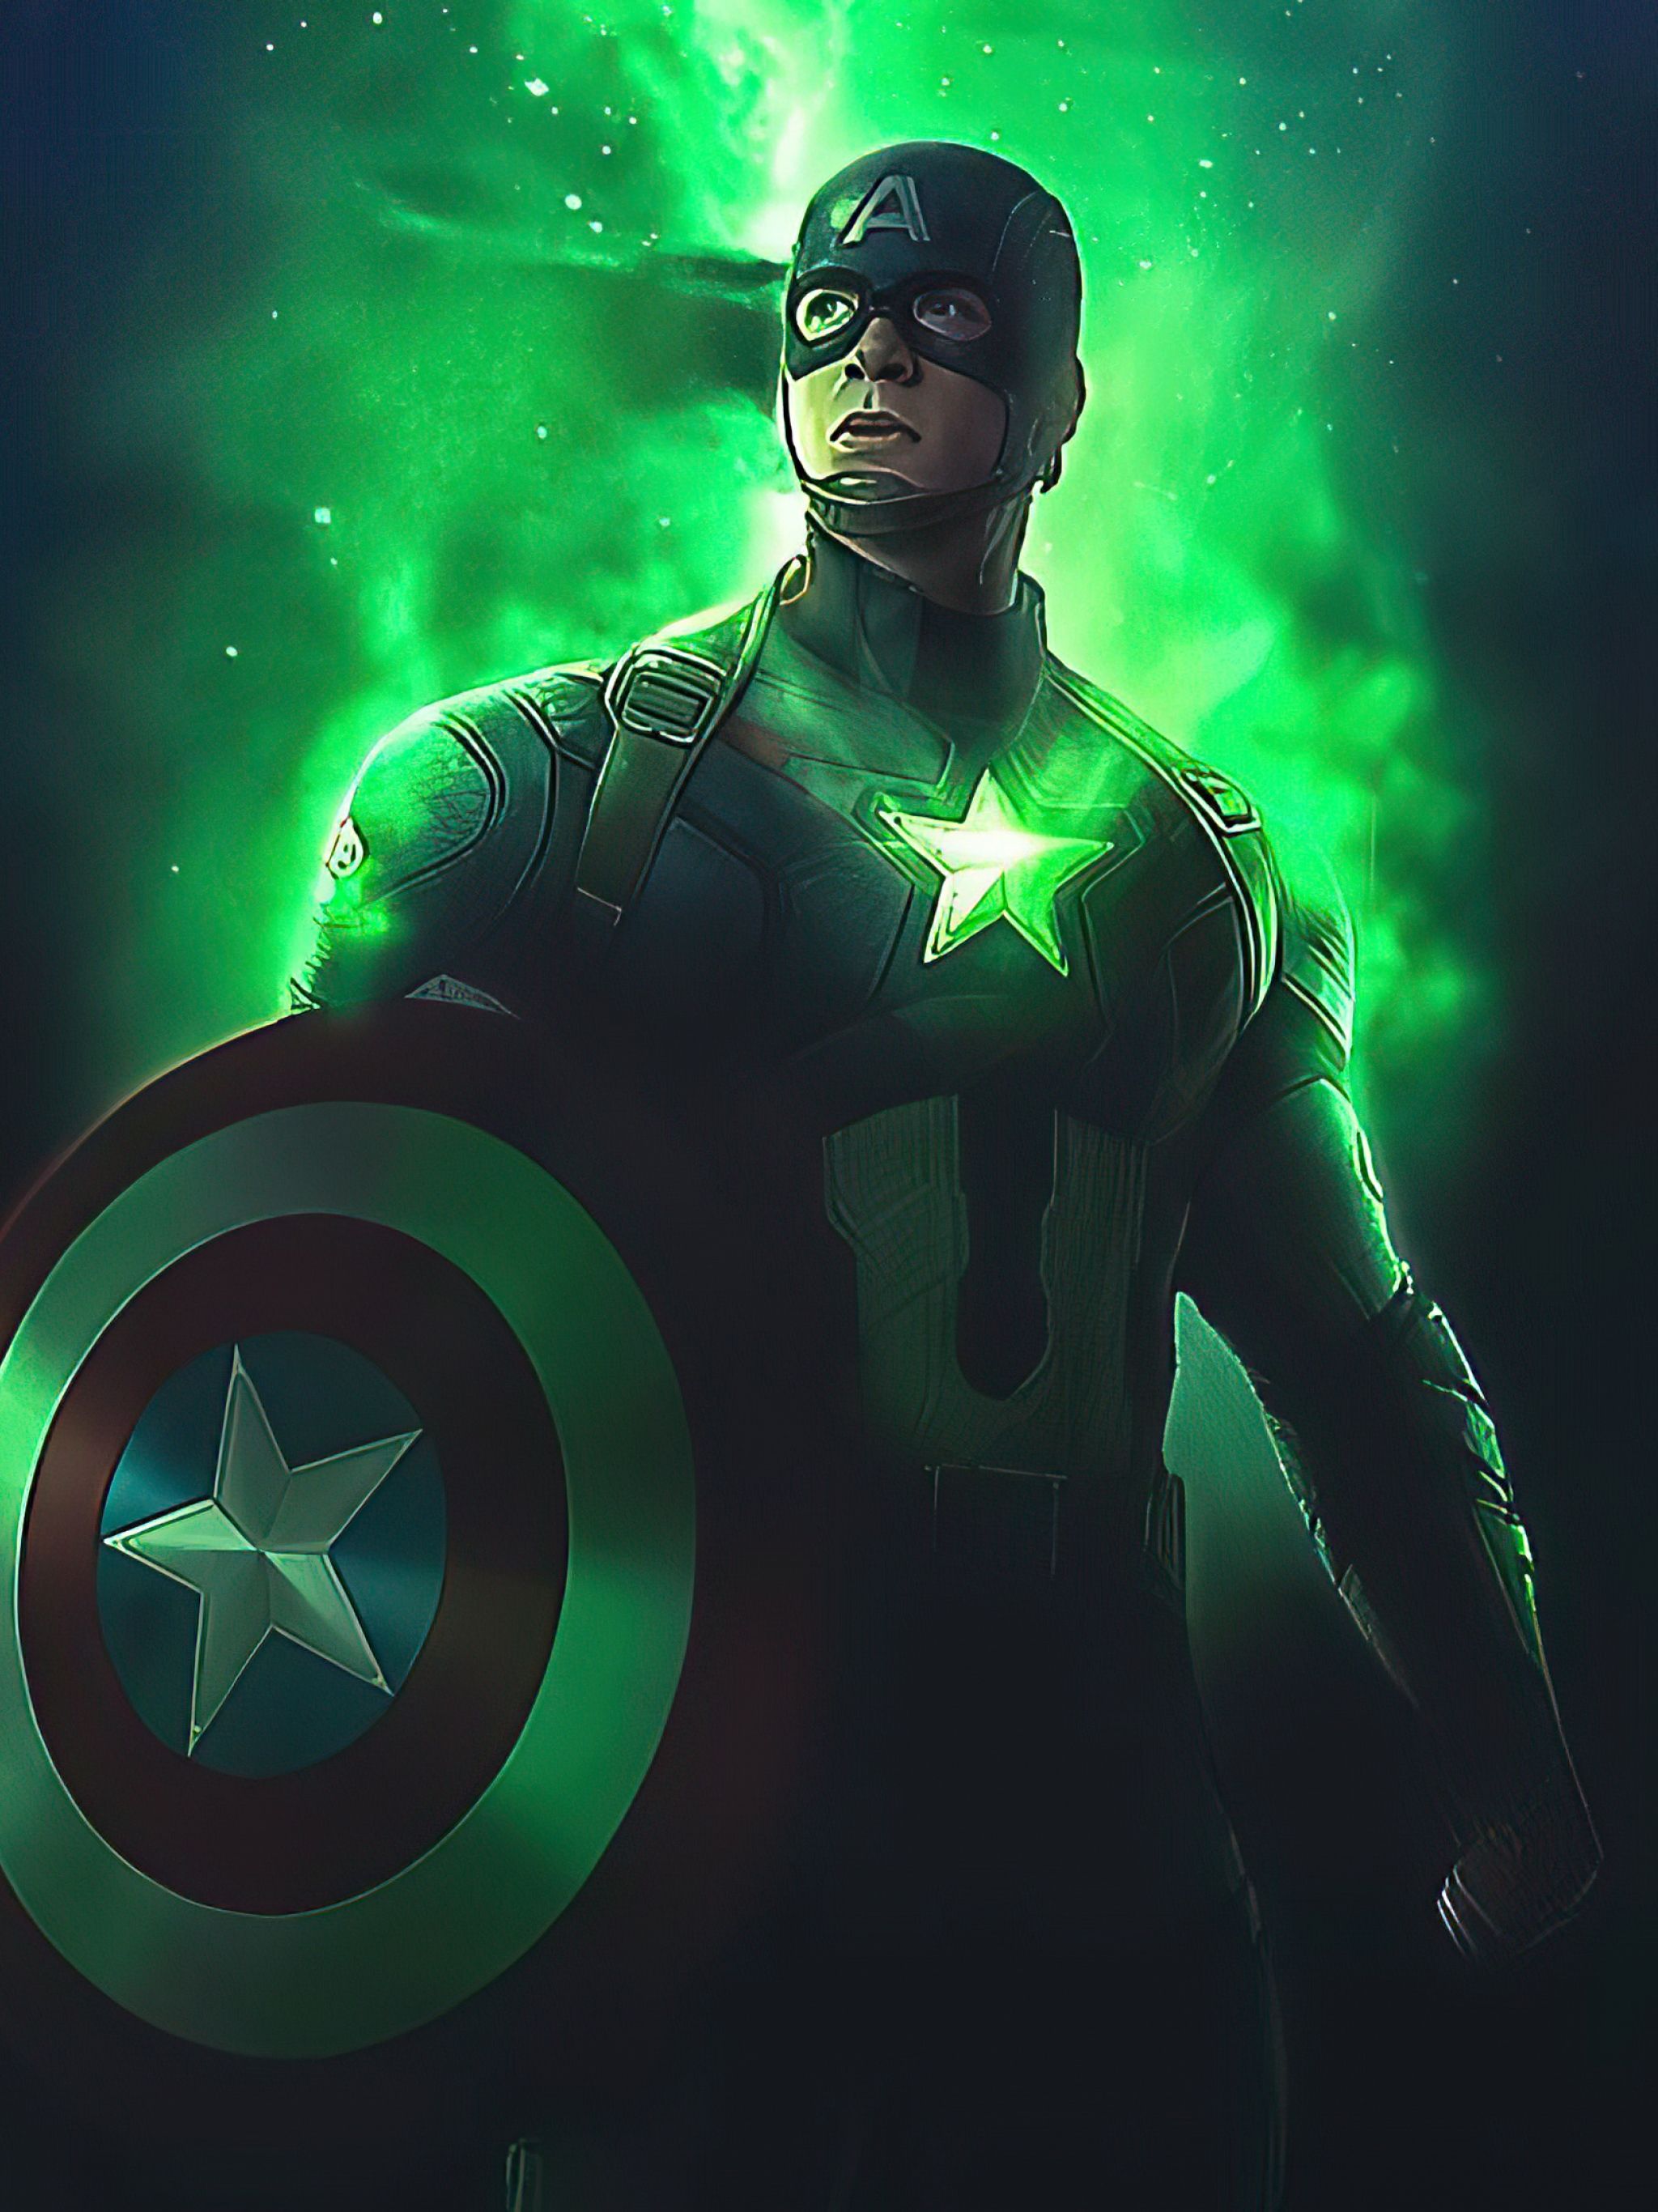 Captain America in a green suit holding a shield - Captain America